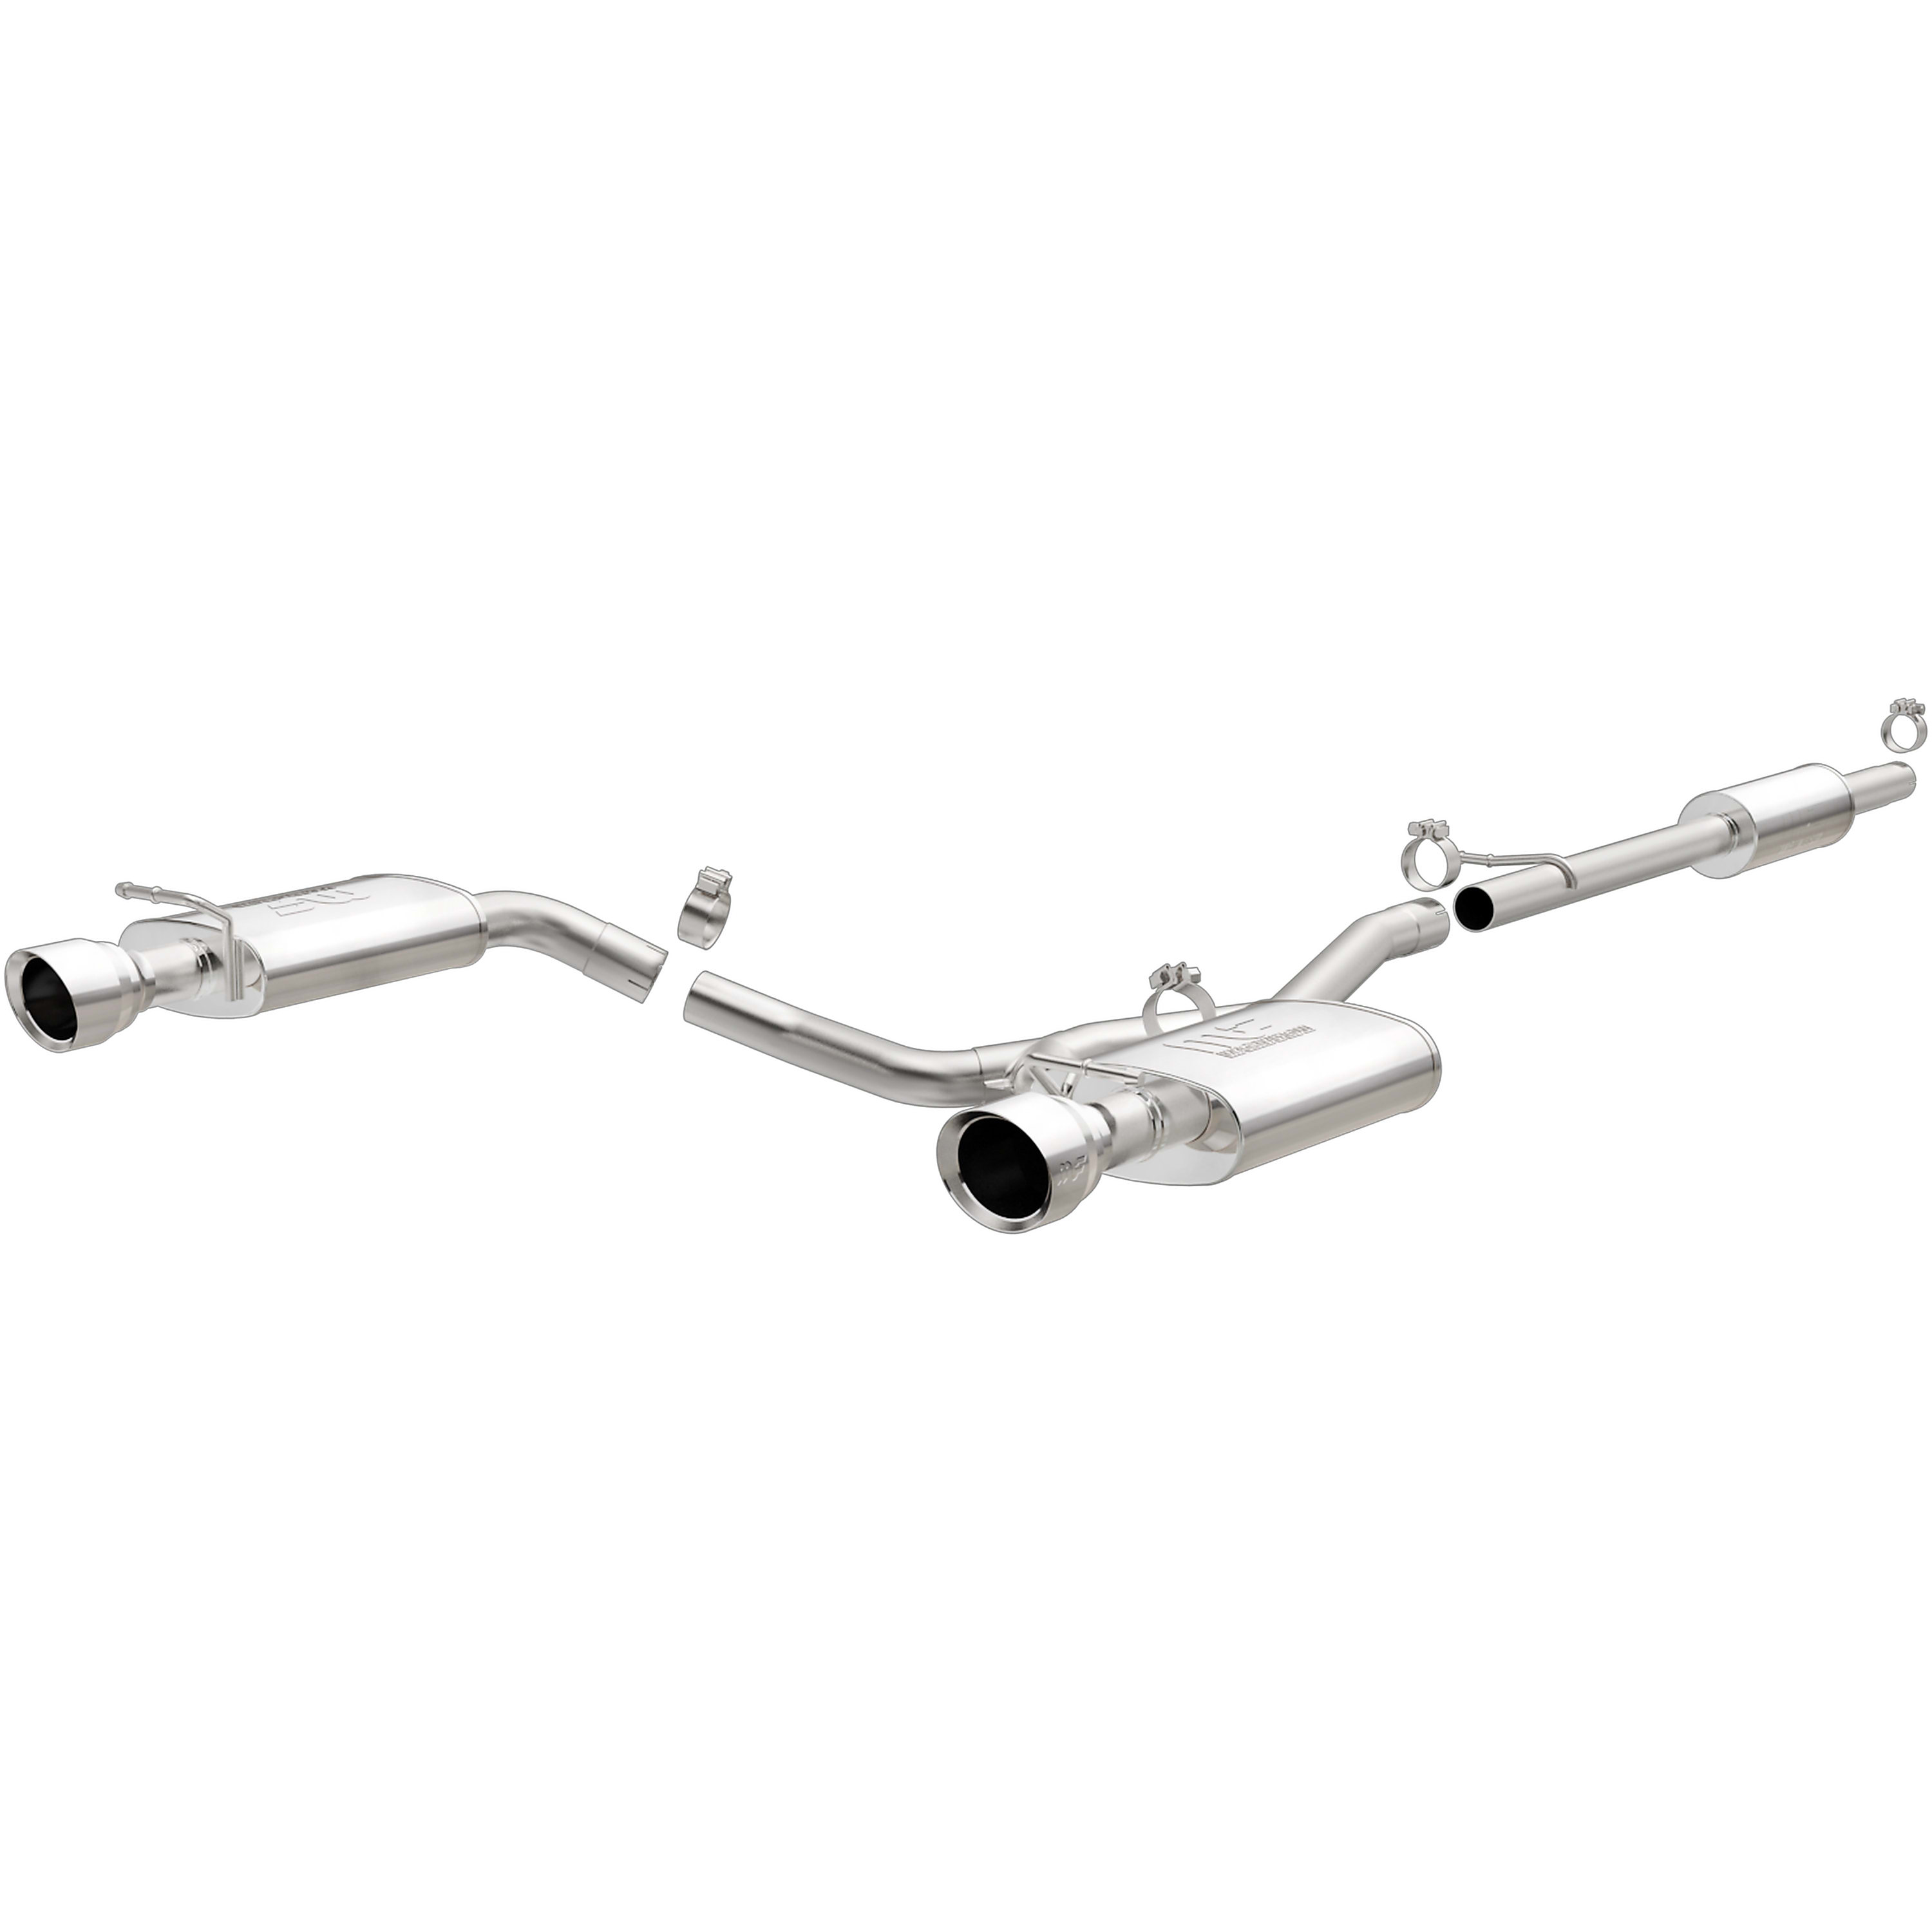 2016 Ford Explorer Exhaust System Replacement | CarParts.com